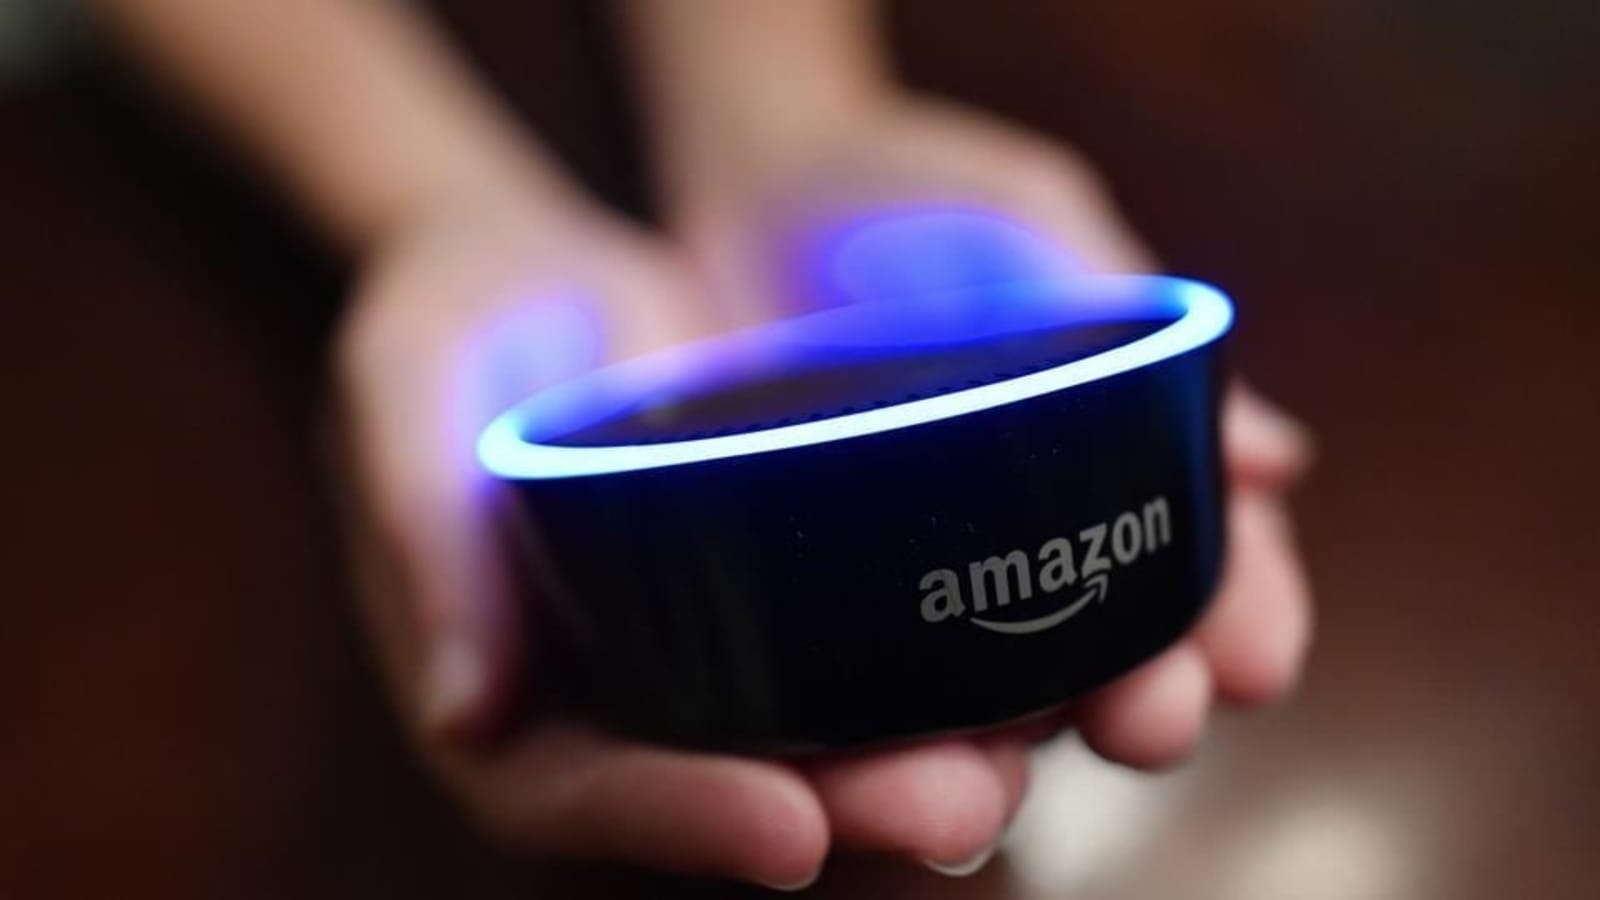 Fixes Alexa Glitch That Could Have Divulged Personal Data